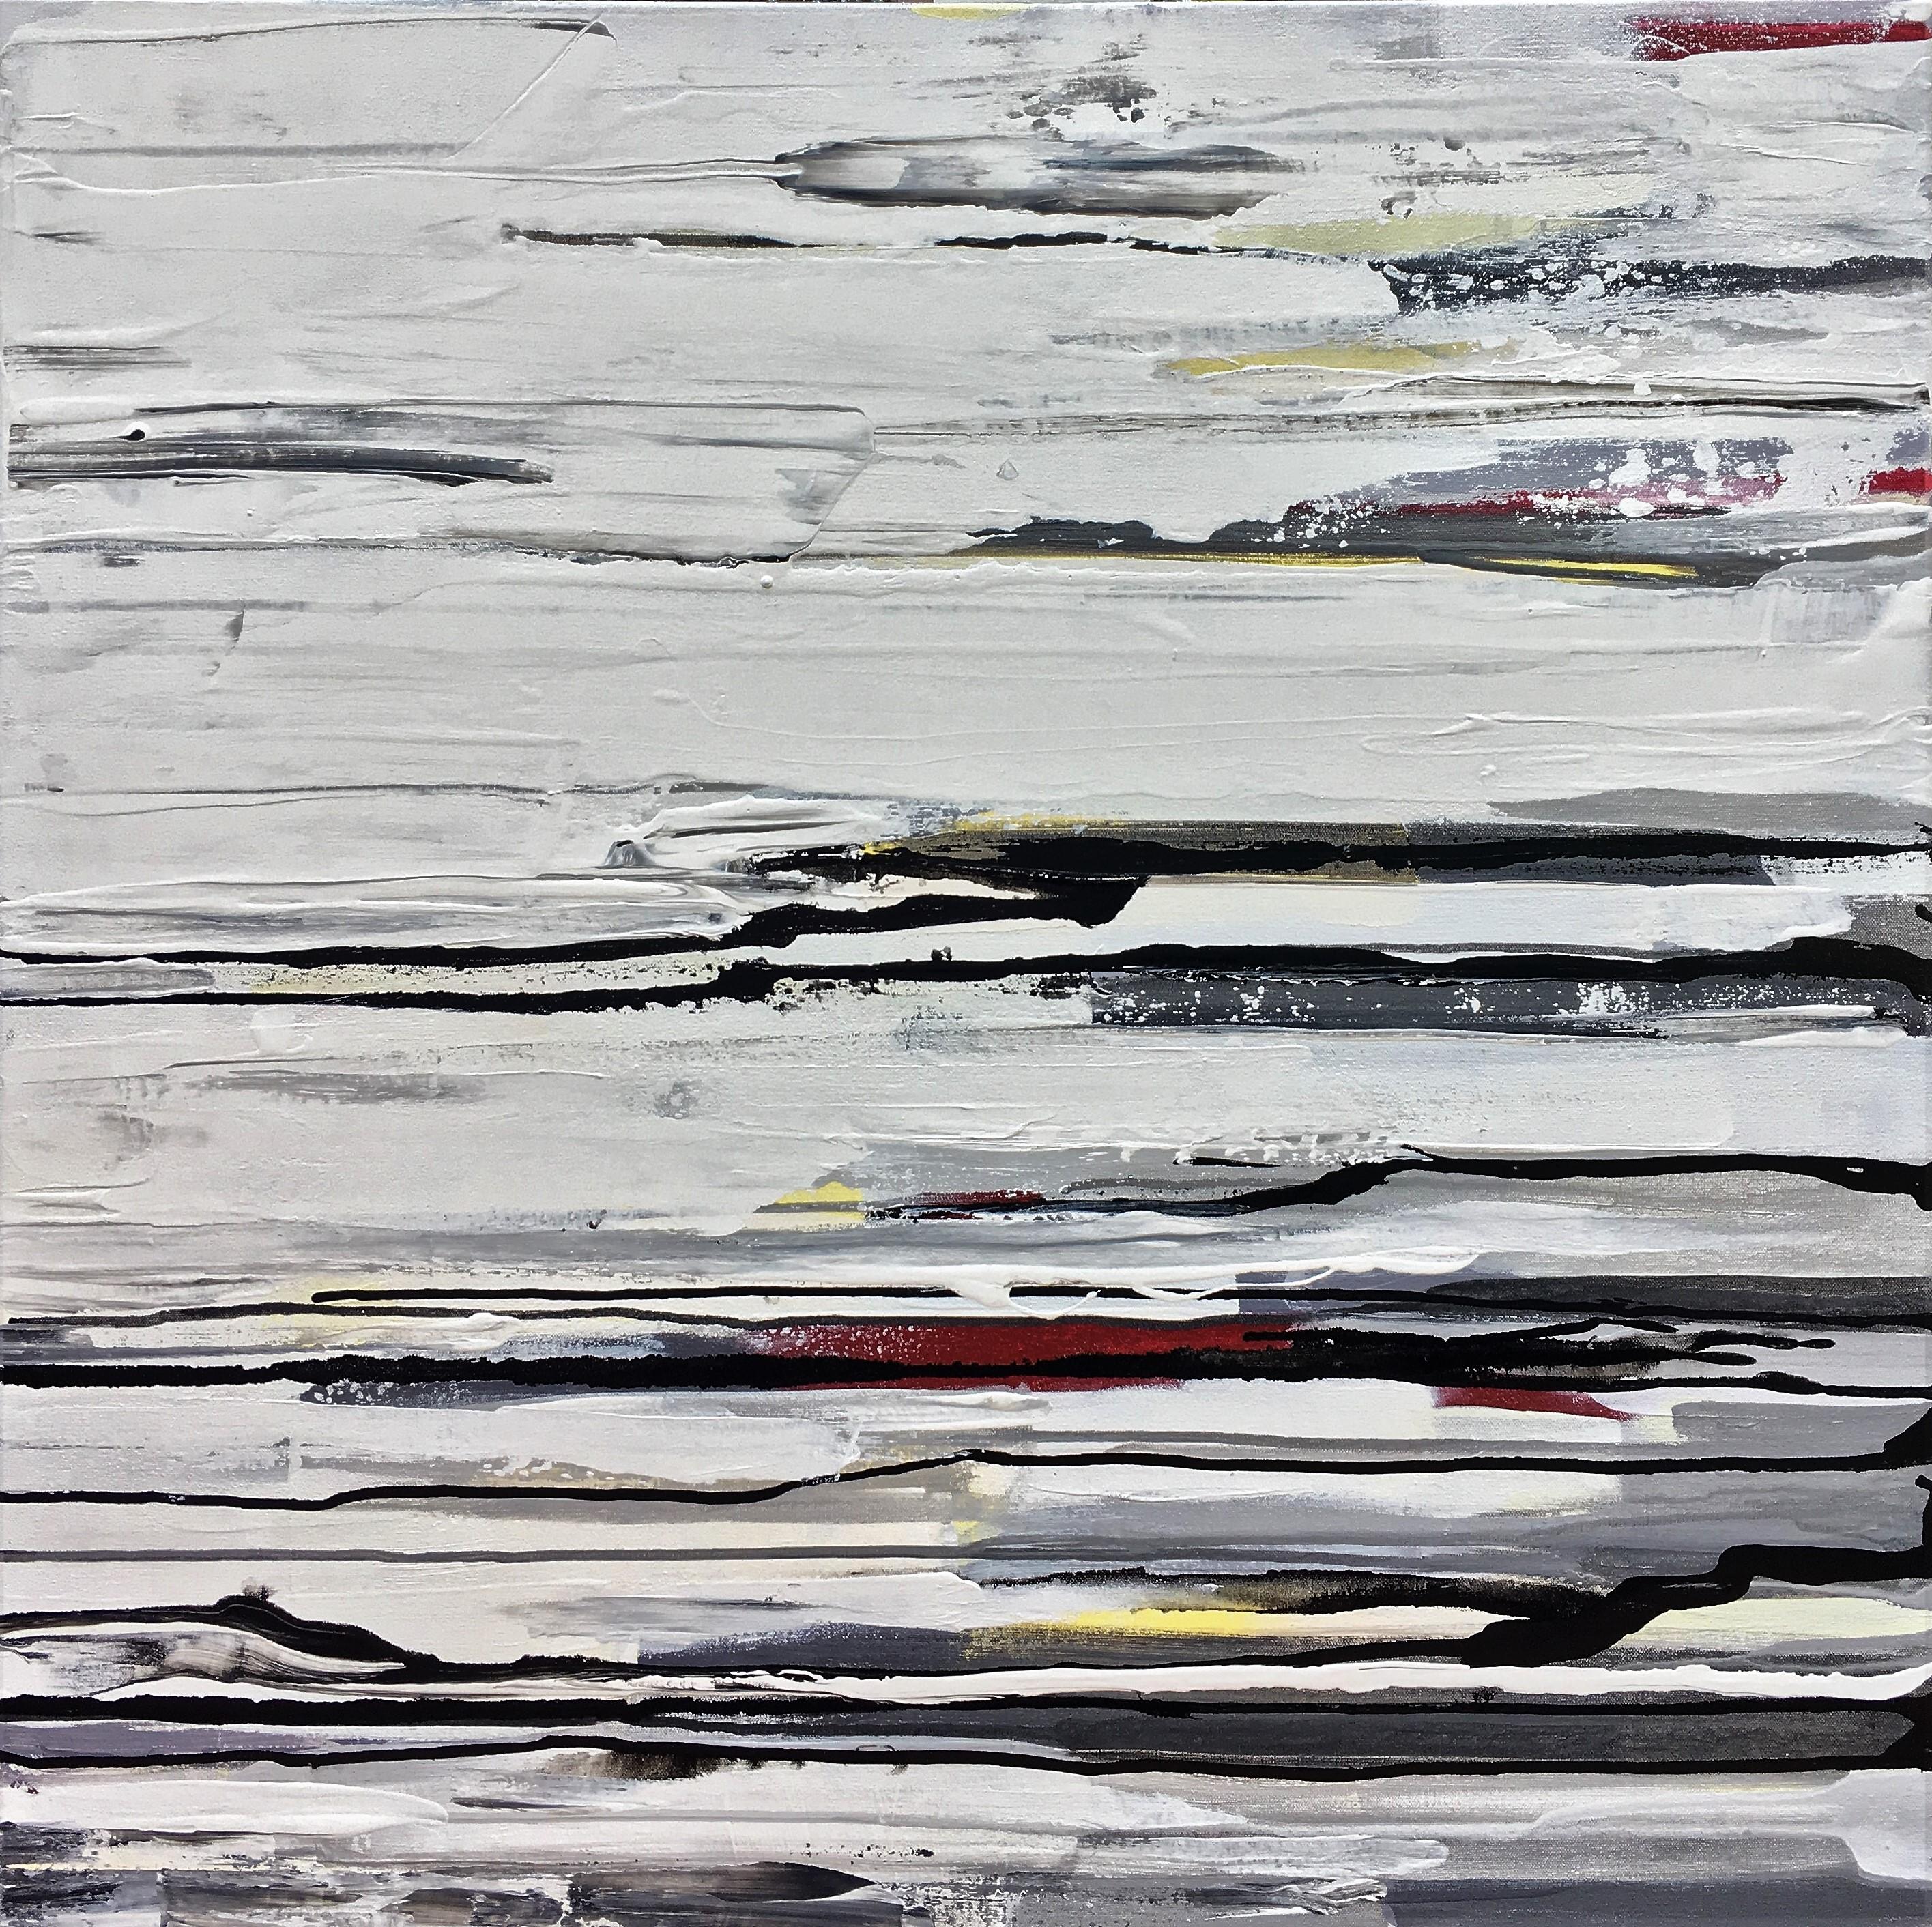 Artist Commentary:
Watching the flow of paint as it rolls down the canvas is a beautiful thing, in my mind. I truly enjoyed mixing and pouring and watching the painting develop into this piece that I love.

Keywords: Stripes, white, calm, movement,